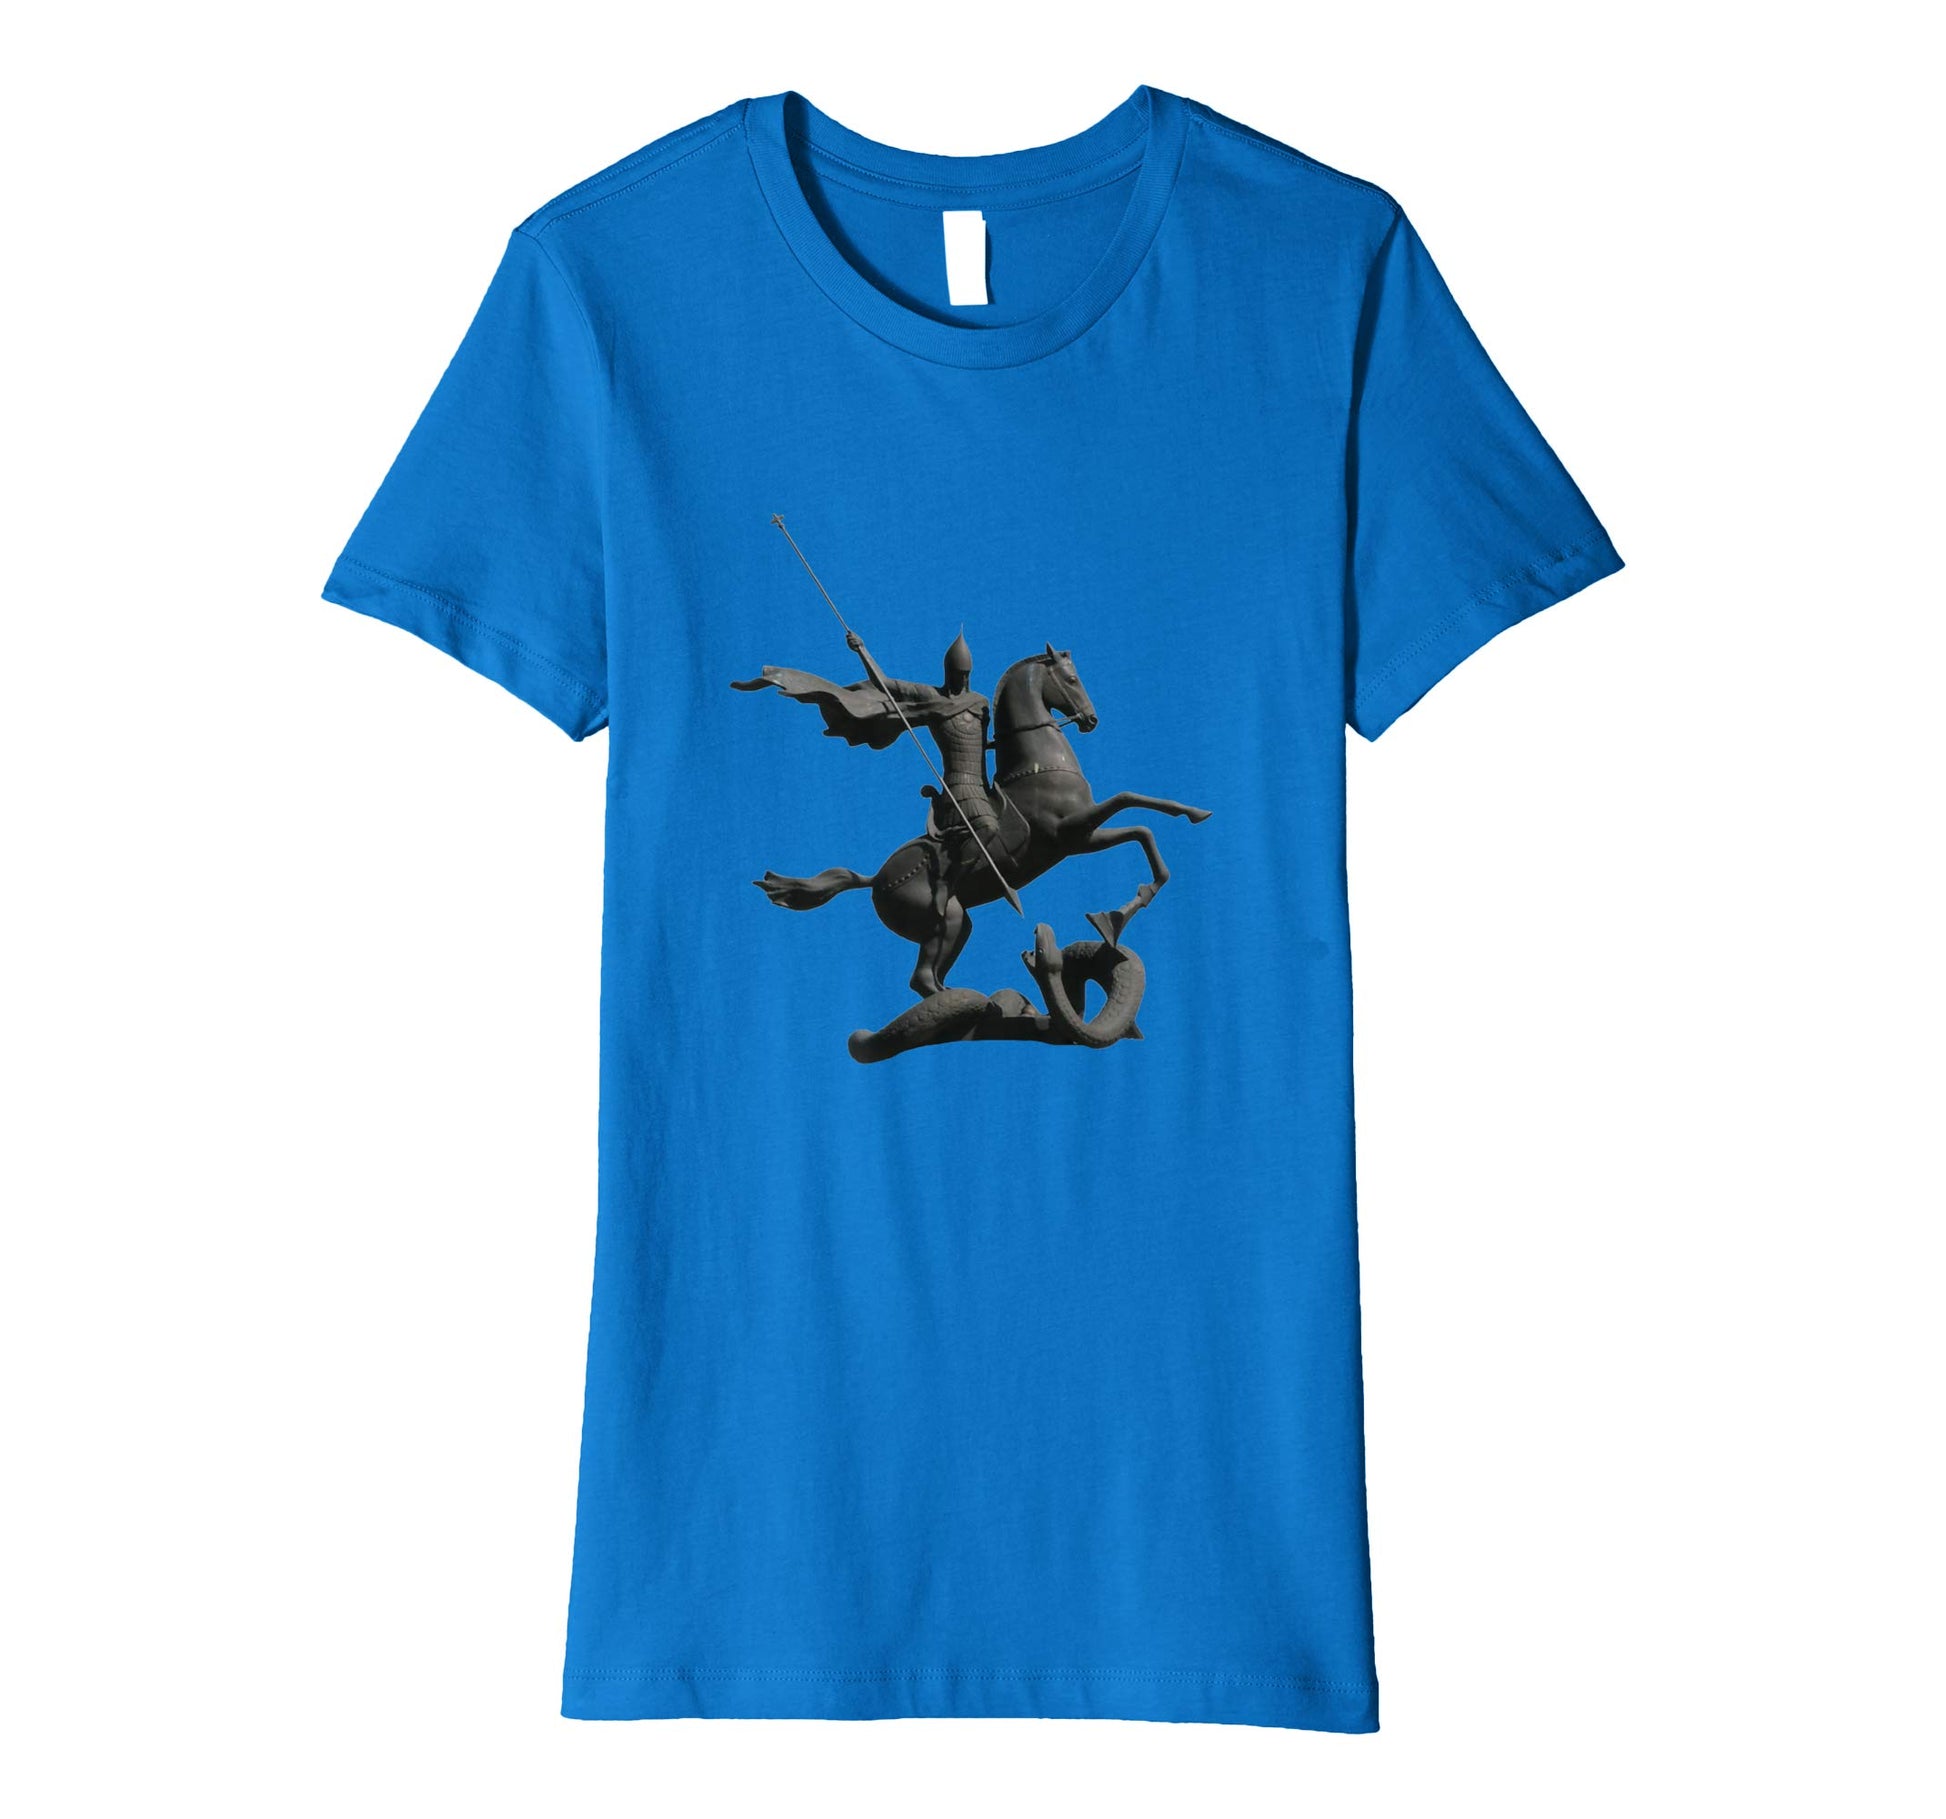 Womens Cotton Tee T-shirt Gift for Mom with Saint George and Dragon Royal Blue